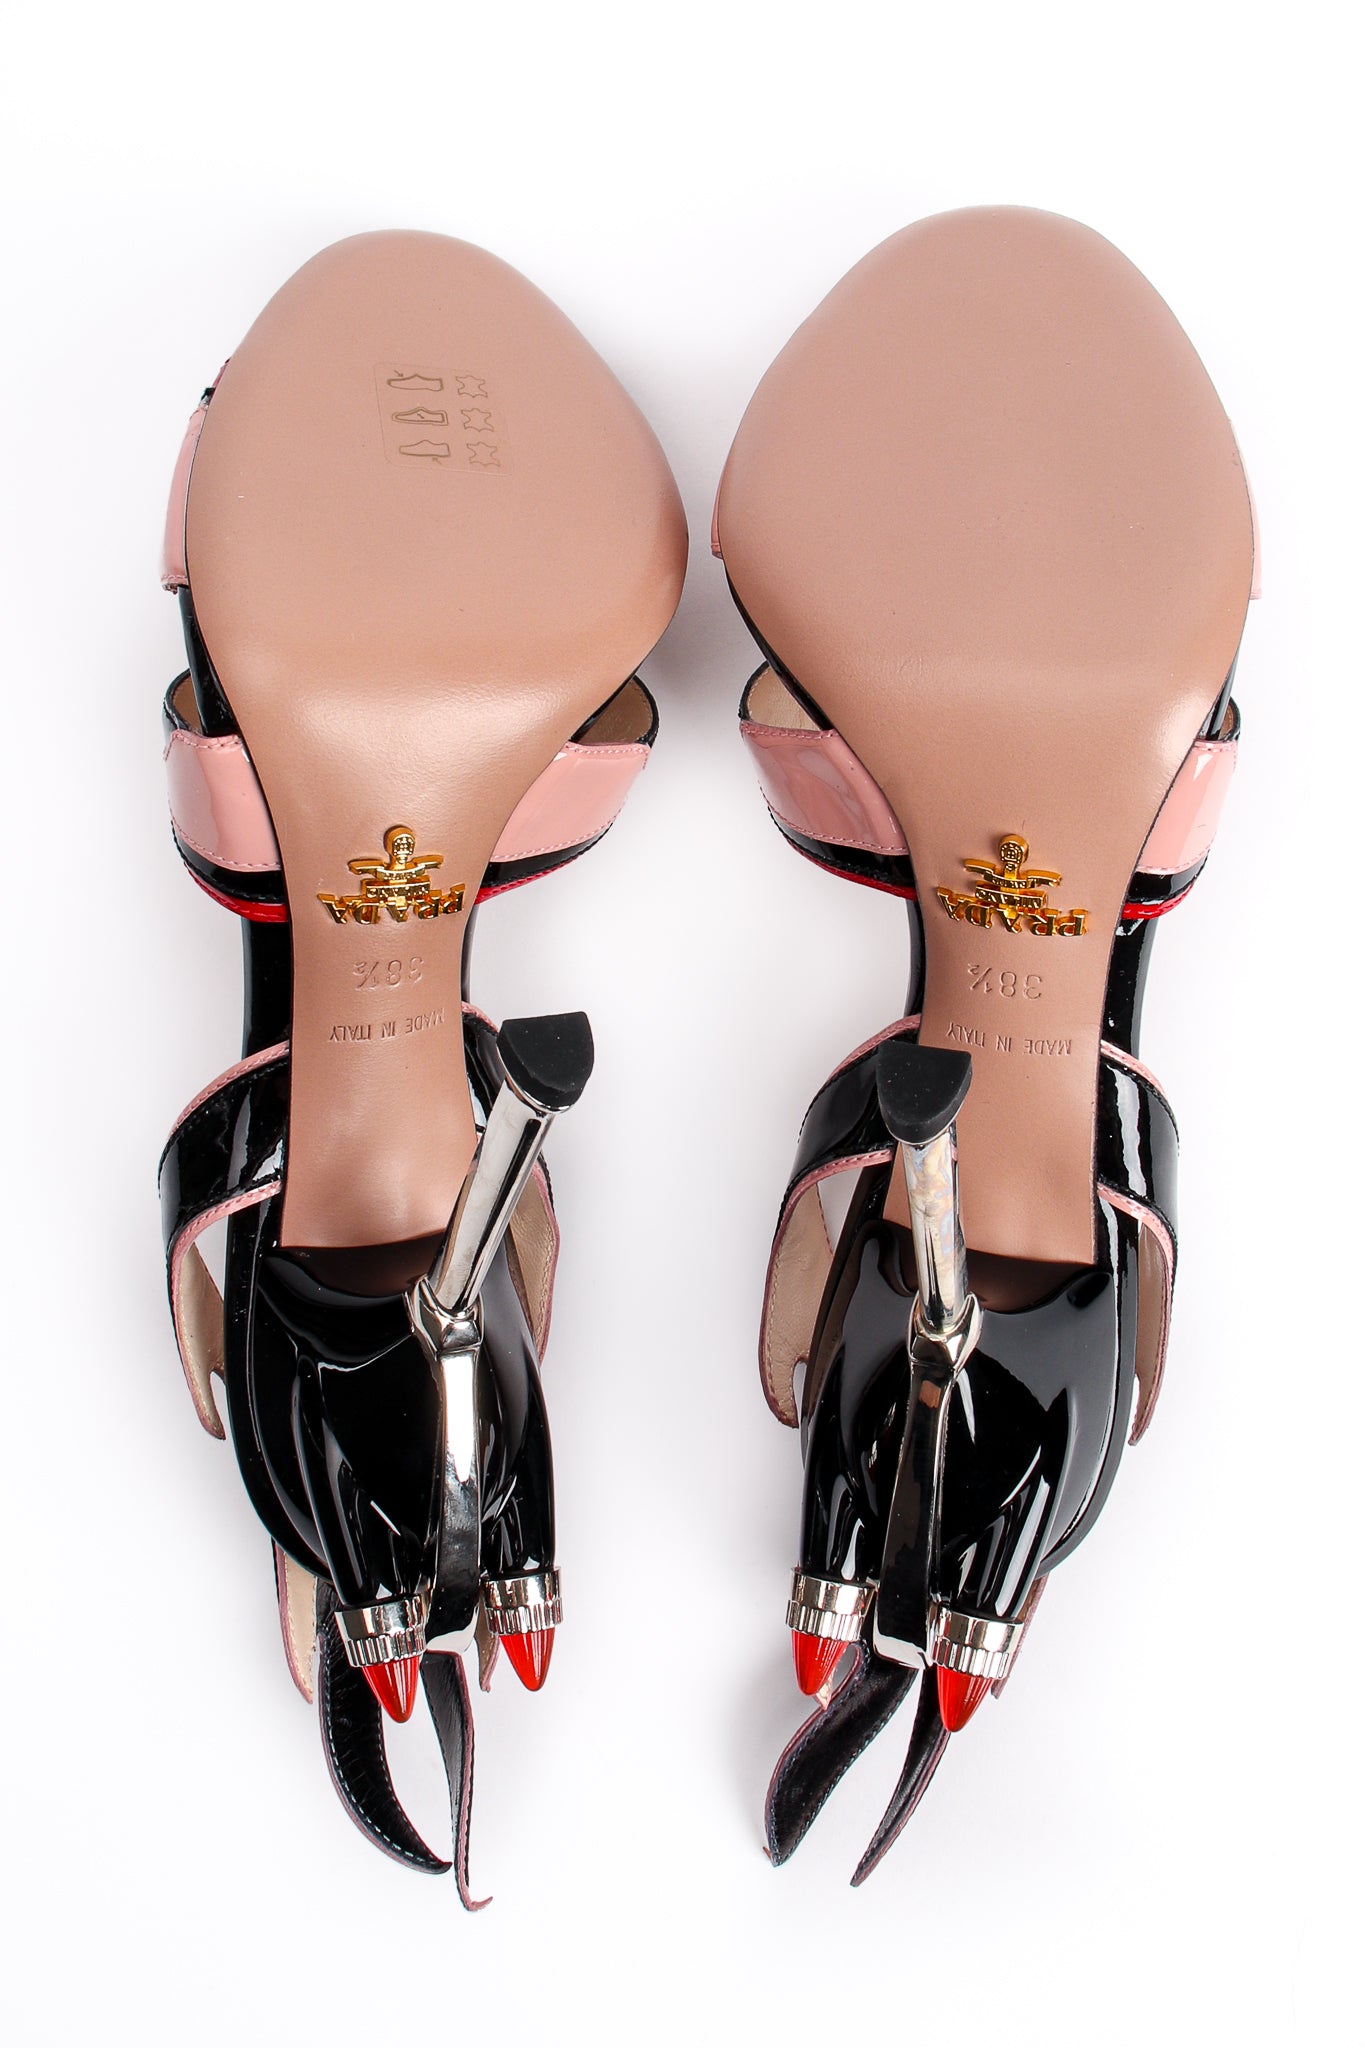 Vintage Prada SS 2012 Jeweled Patent Leather Tail Light Flame Sandal sole at Recess Los Angeles